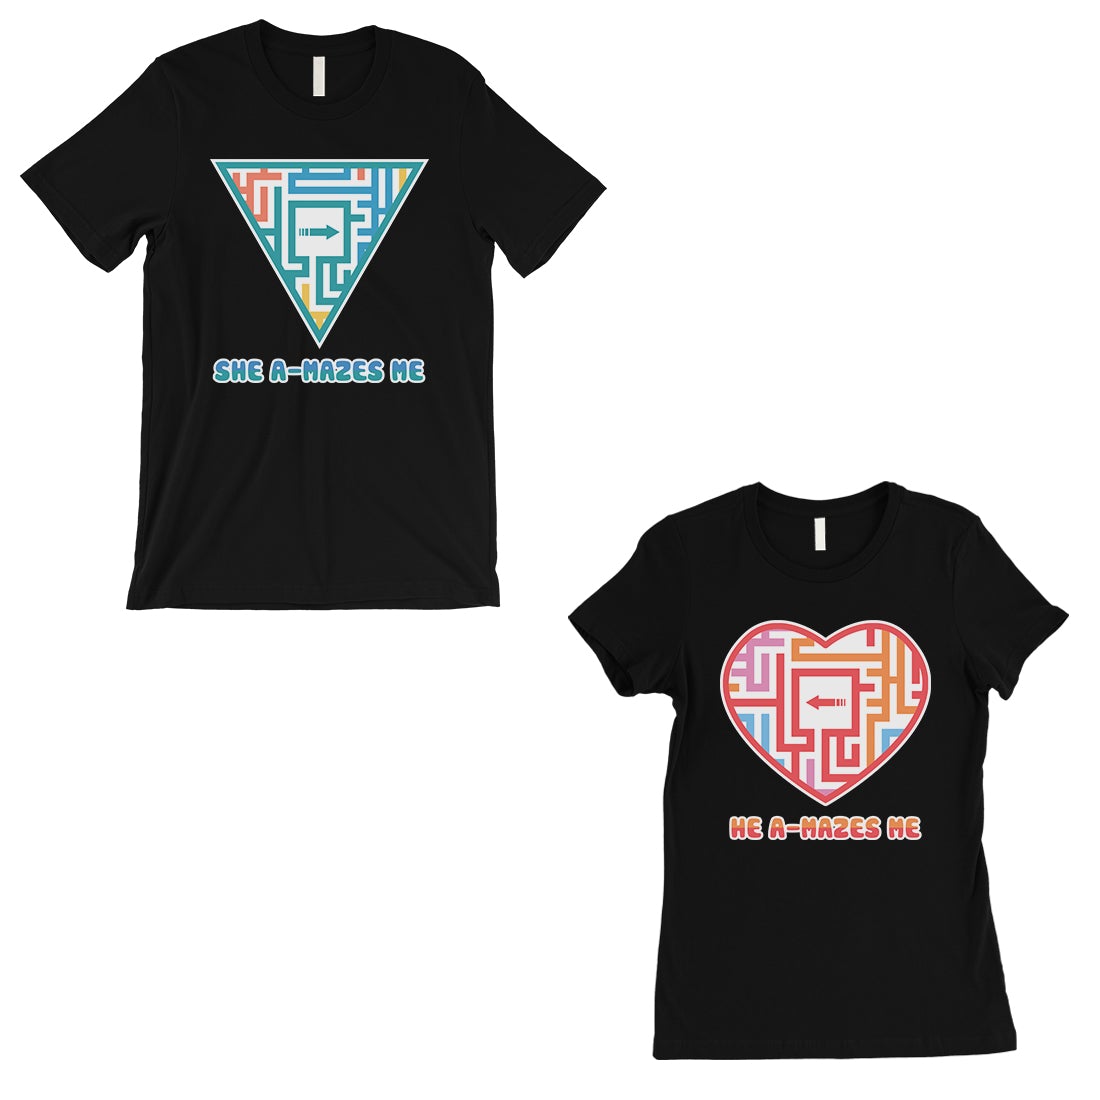 A-Mazes Me Black Matching T-Shirts Couples Anniversary Gift For Him and Her